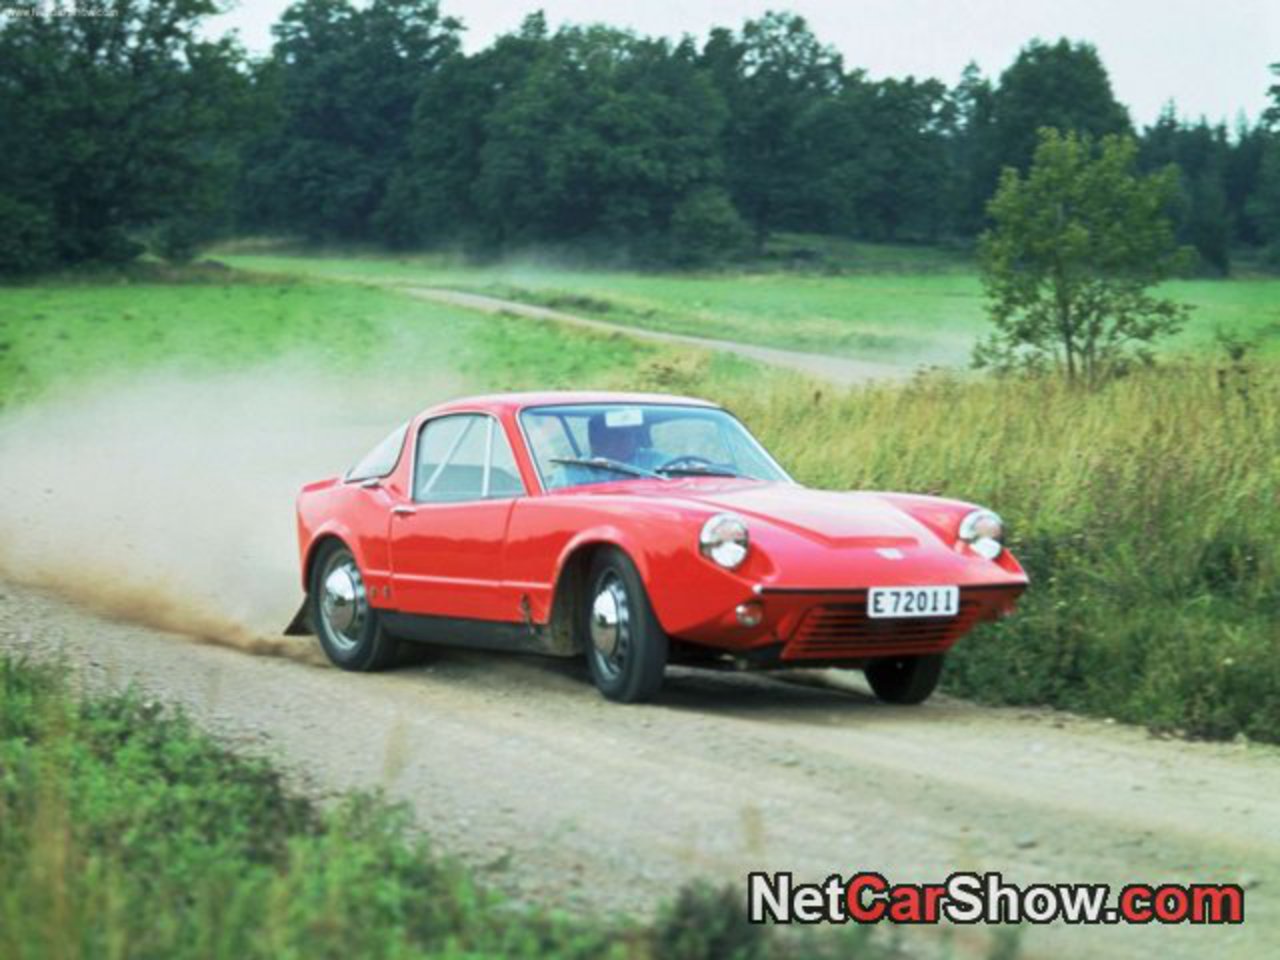 Saab Sonett II picture # 02 of 08, Front Angle, MY 1966, 800x600